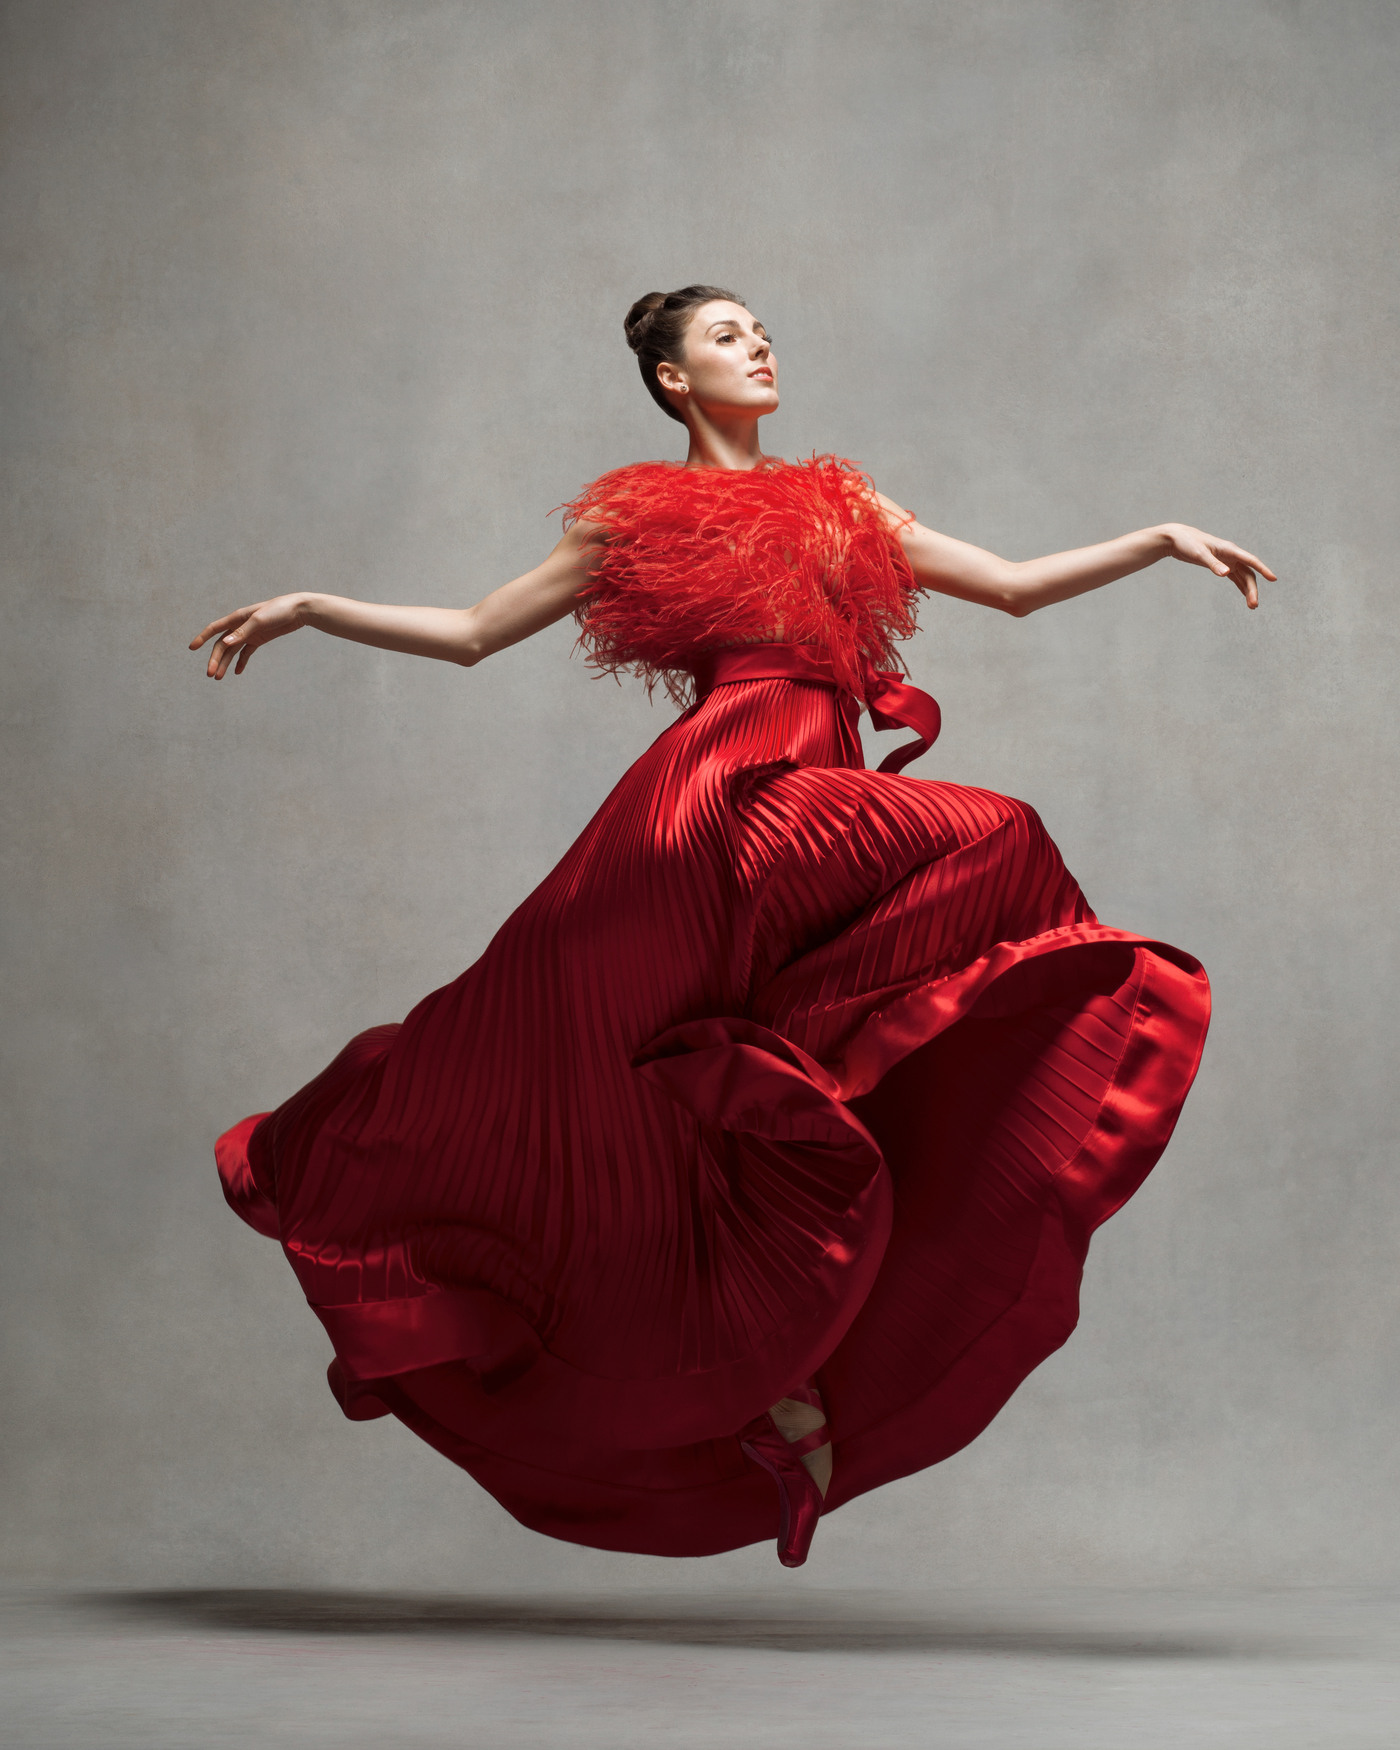 THE STYLE OF MOVEMENT: FASHION AND DANCE